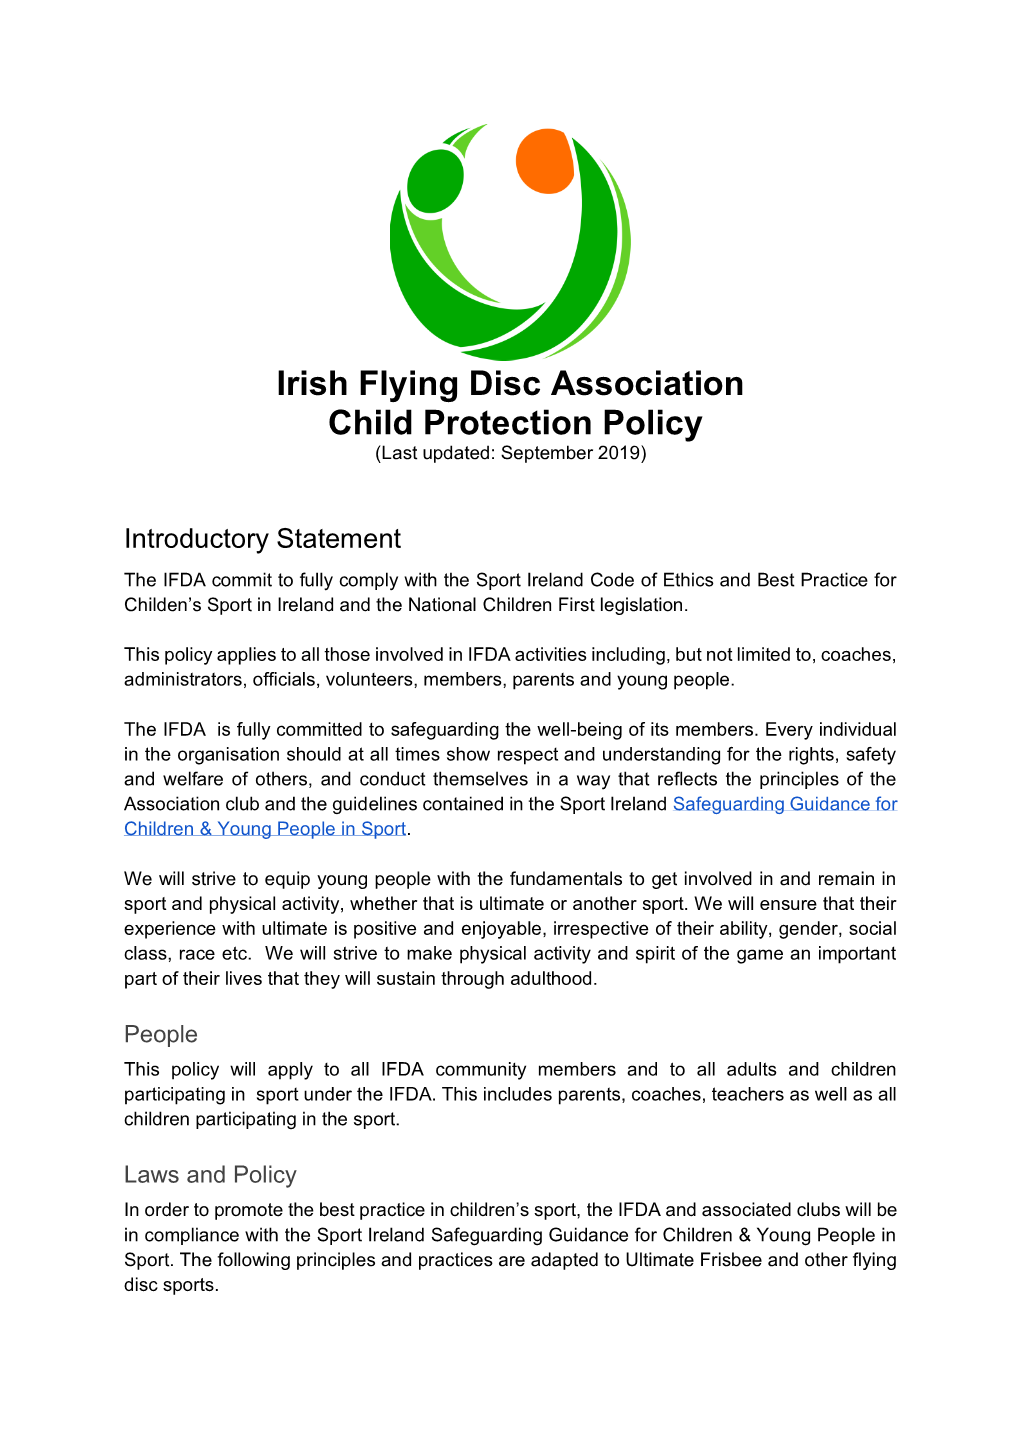 Irish Flying Disc Association Child Protection Policy (Last Updated: September 2019)